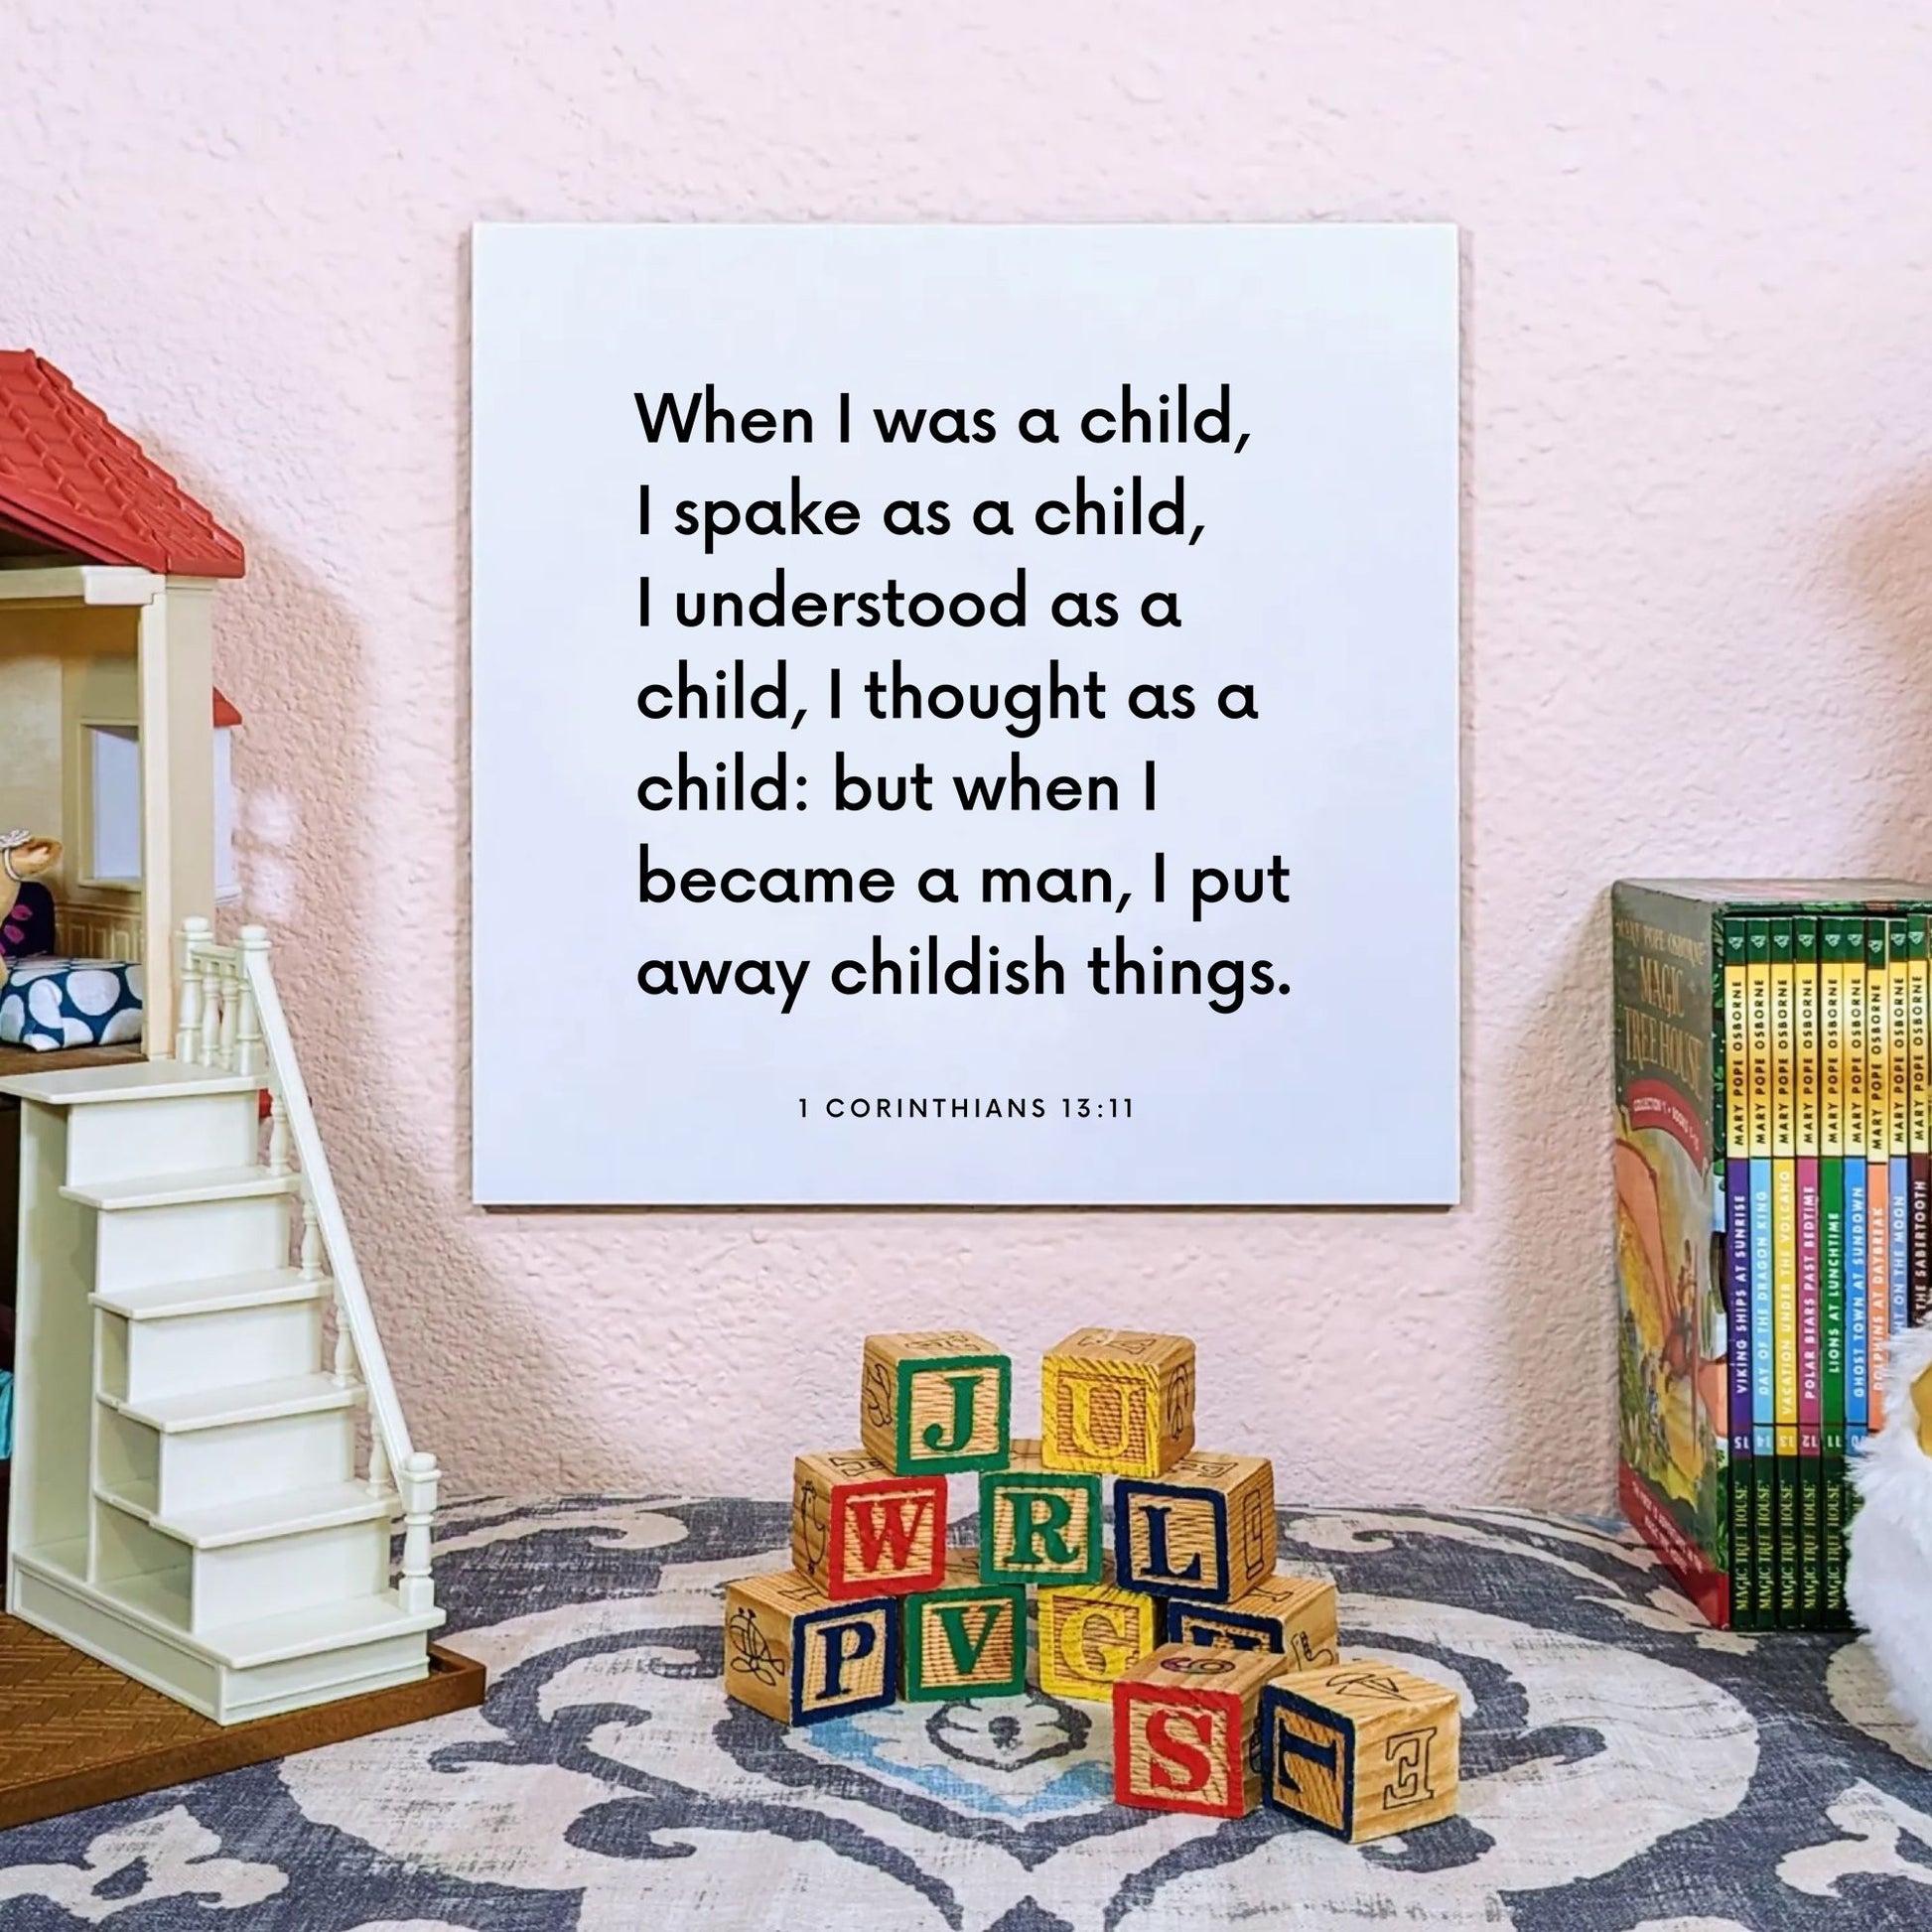 Playroom mouting of the scripture tile for 1 Corinthians 13:11 - "When I was a child, I spake as a child"